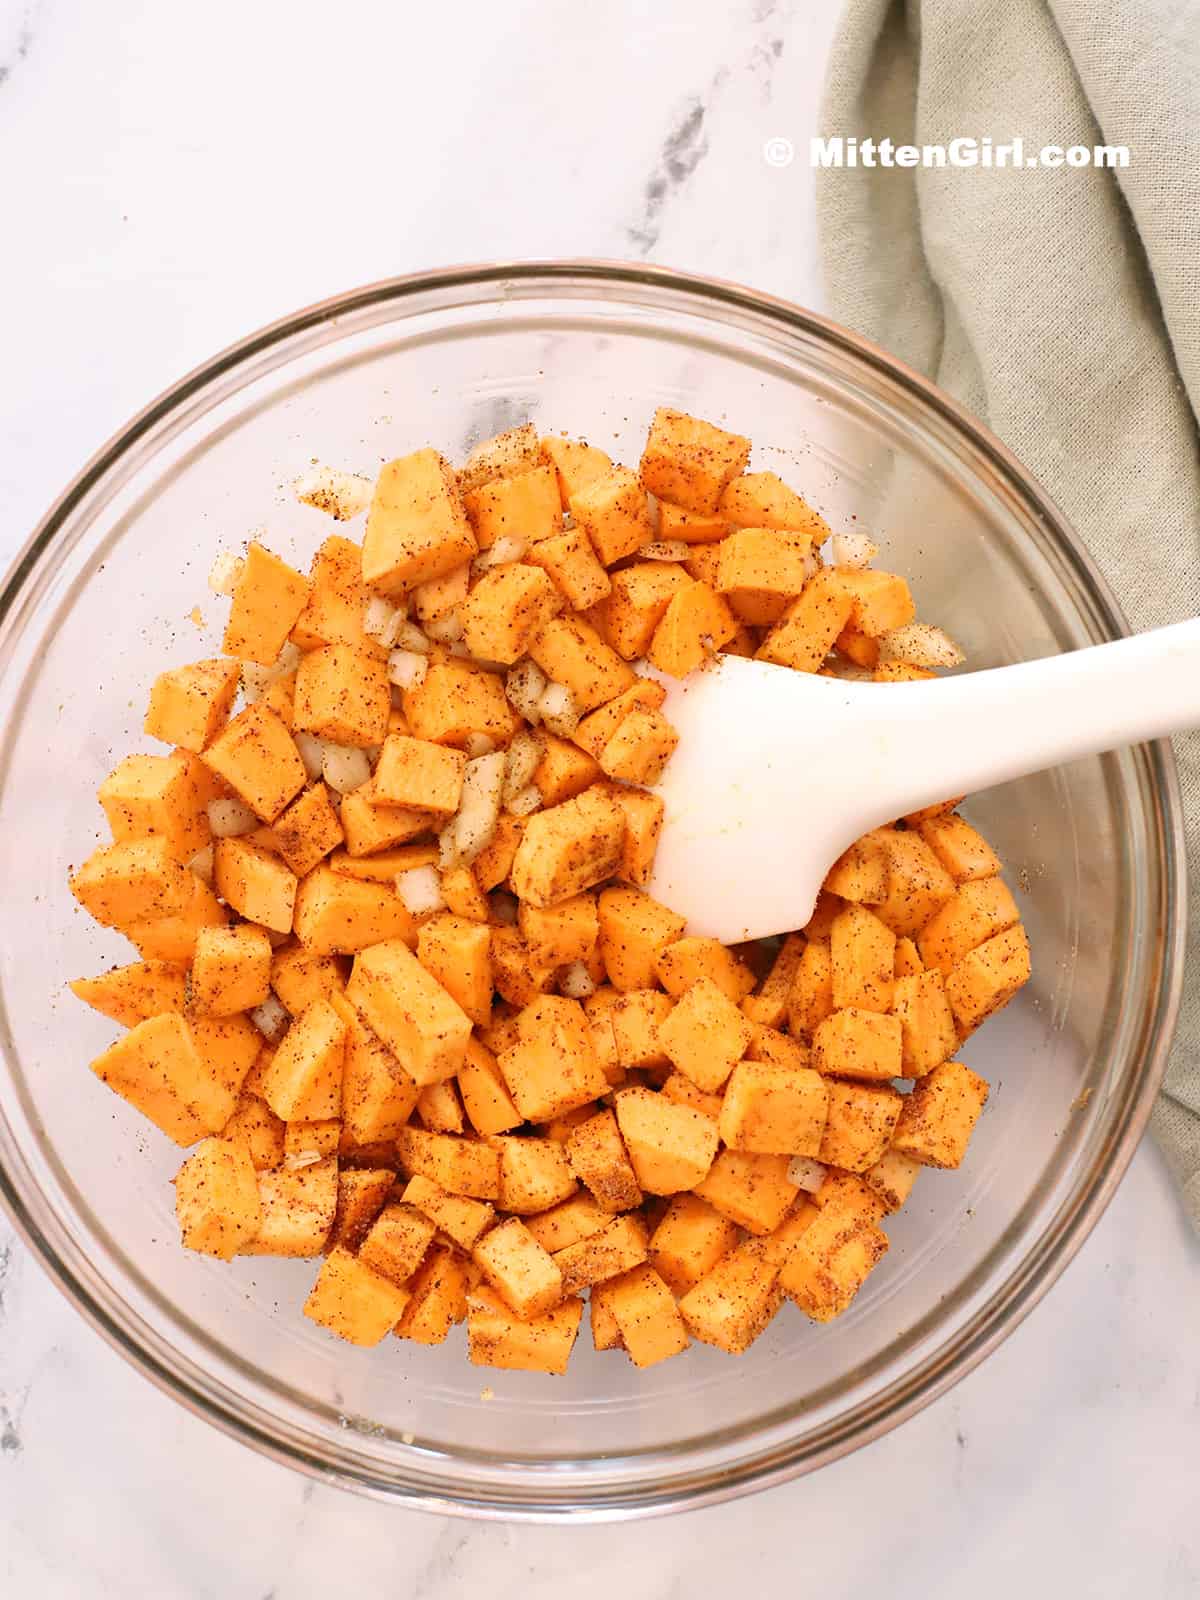 A bowl of diced sweet potatoes, onions, oil, and spices mixed together.